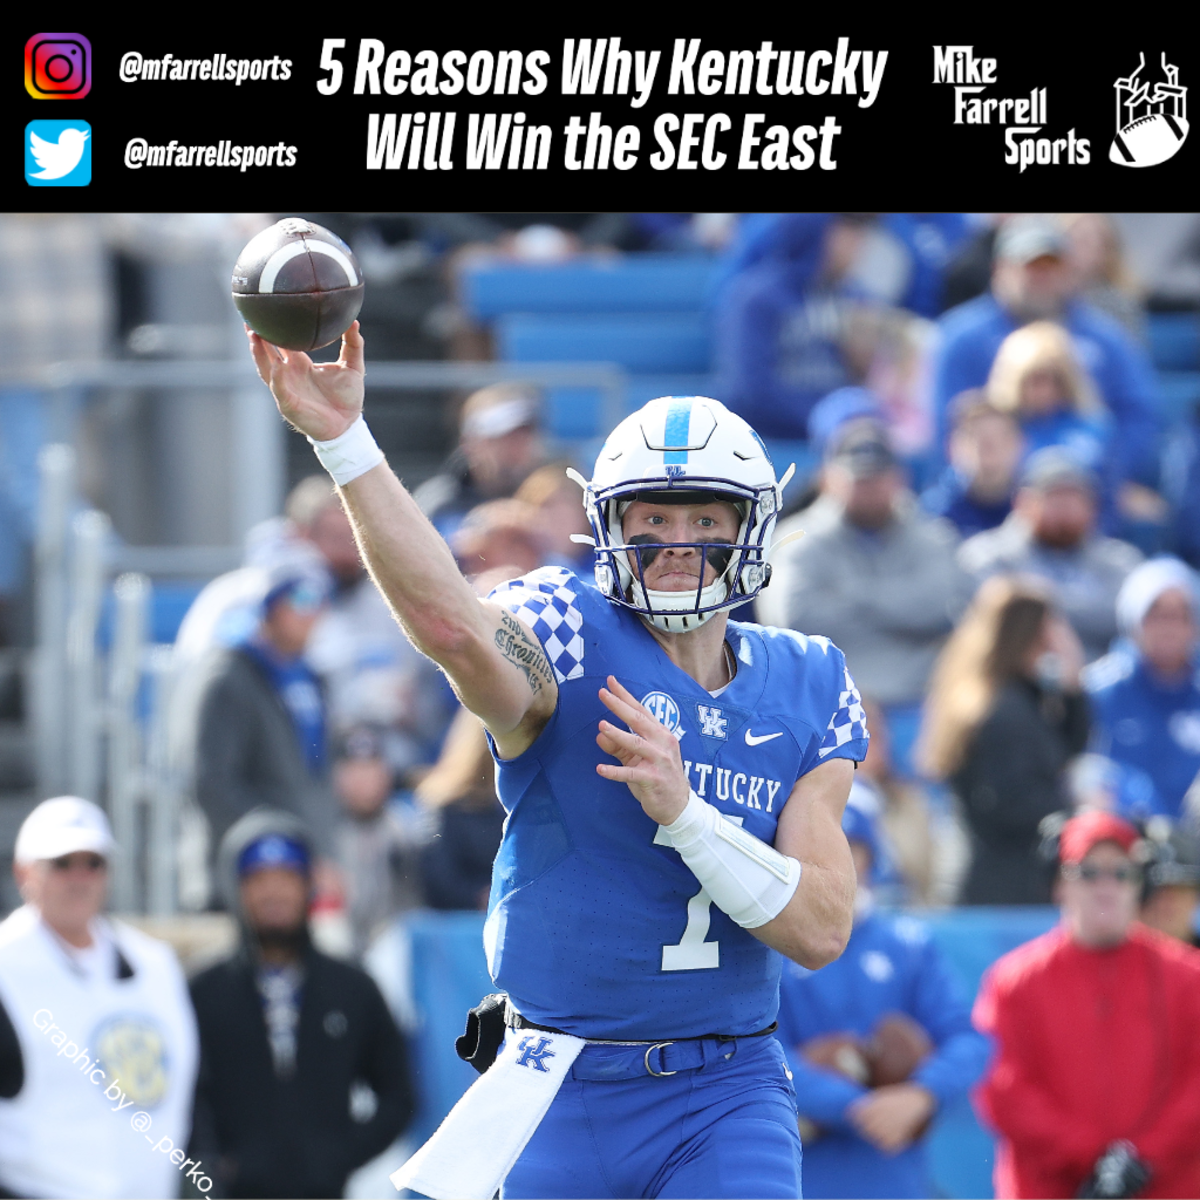 Why Kentucky Wins the SEC East